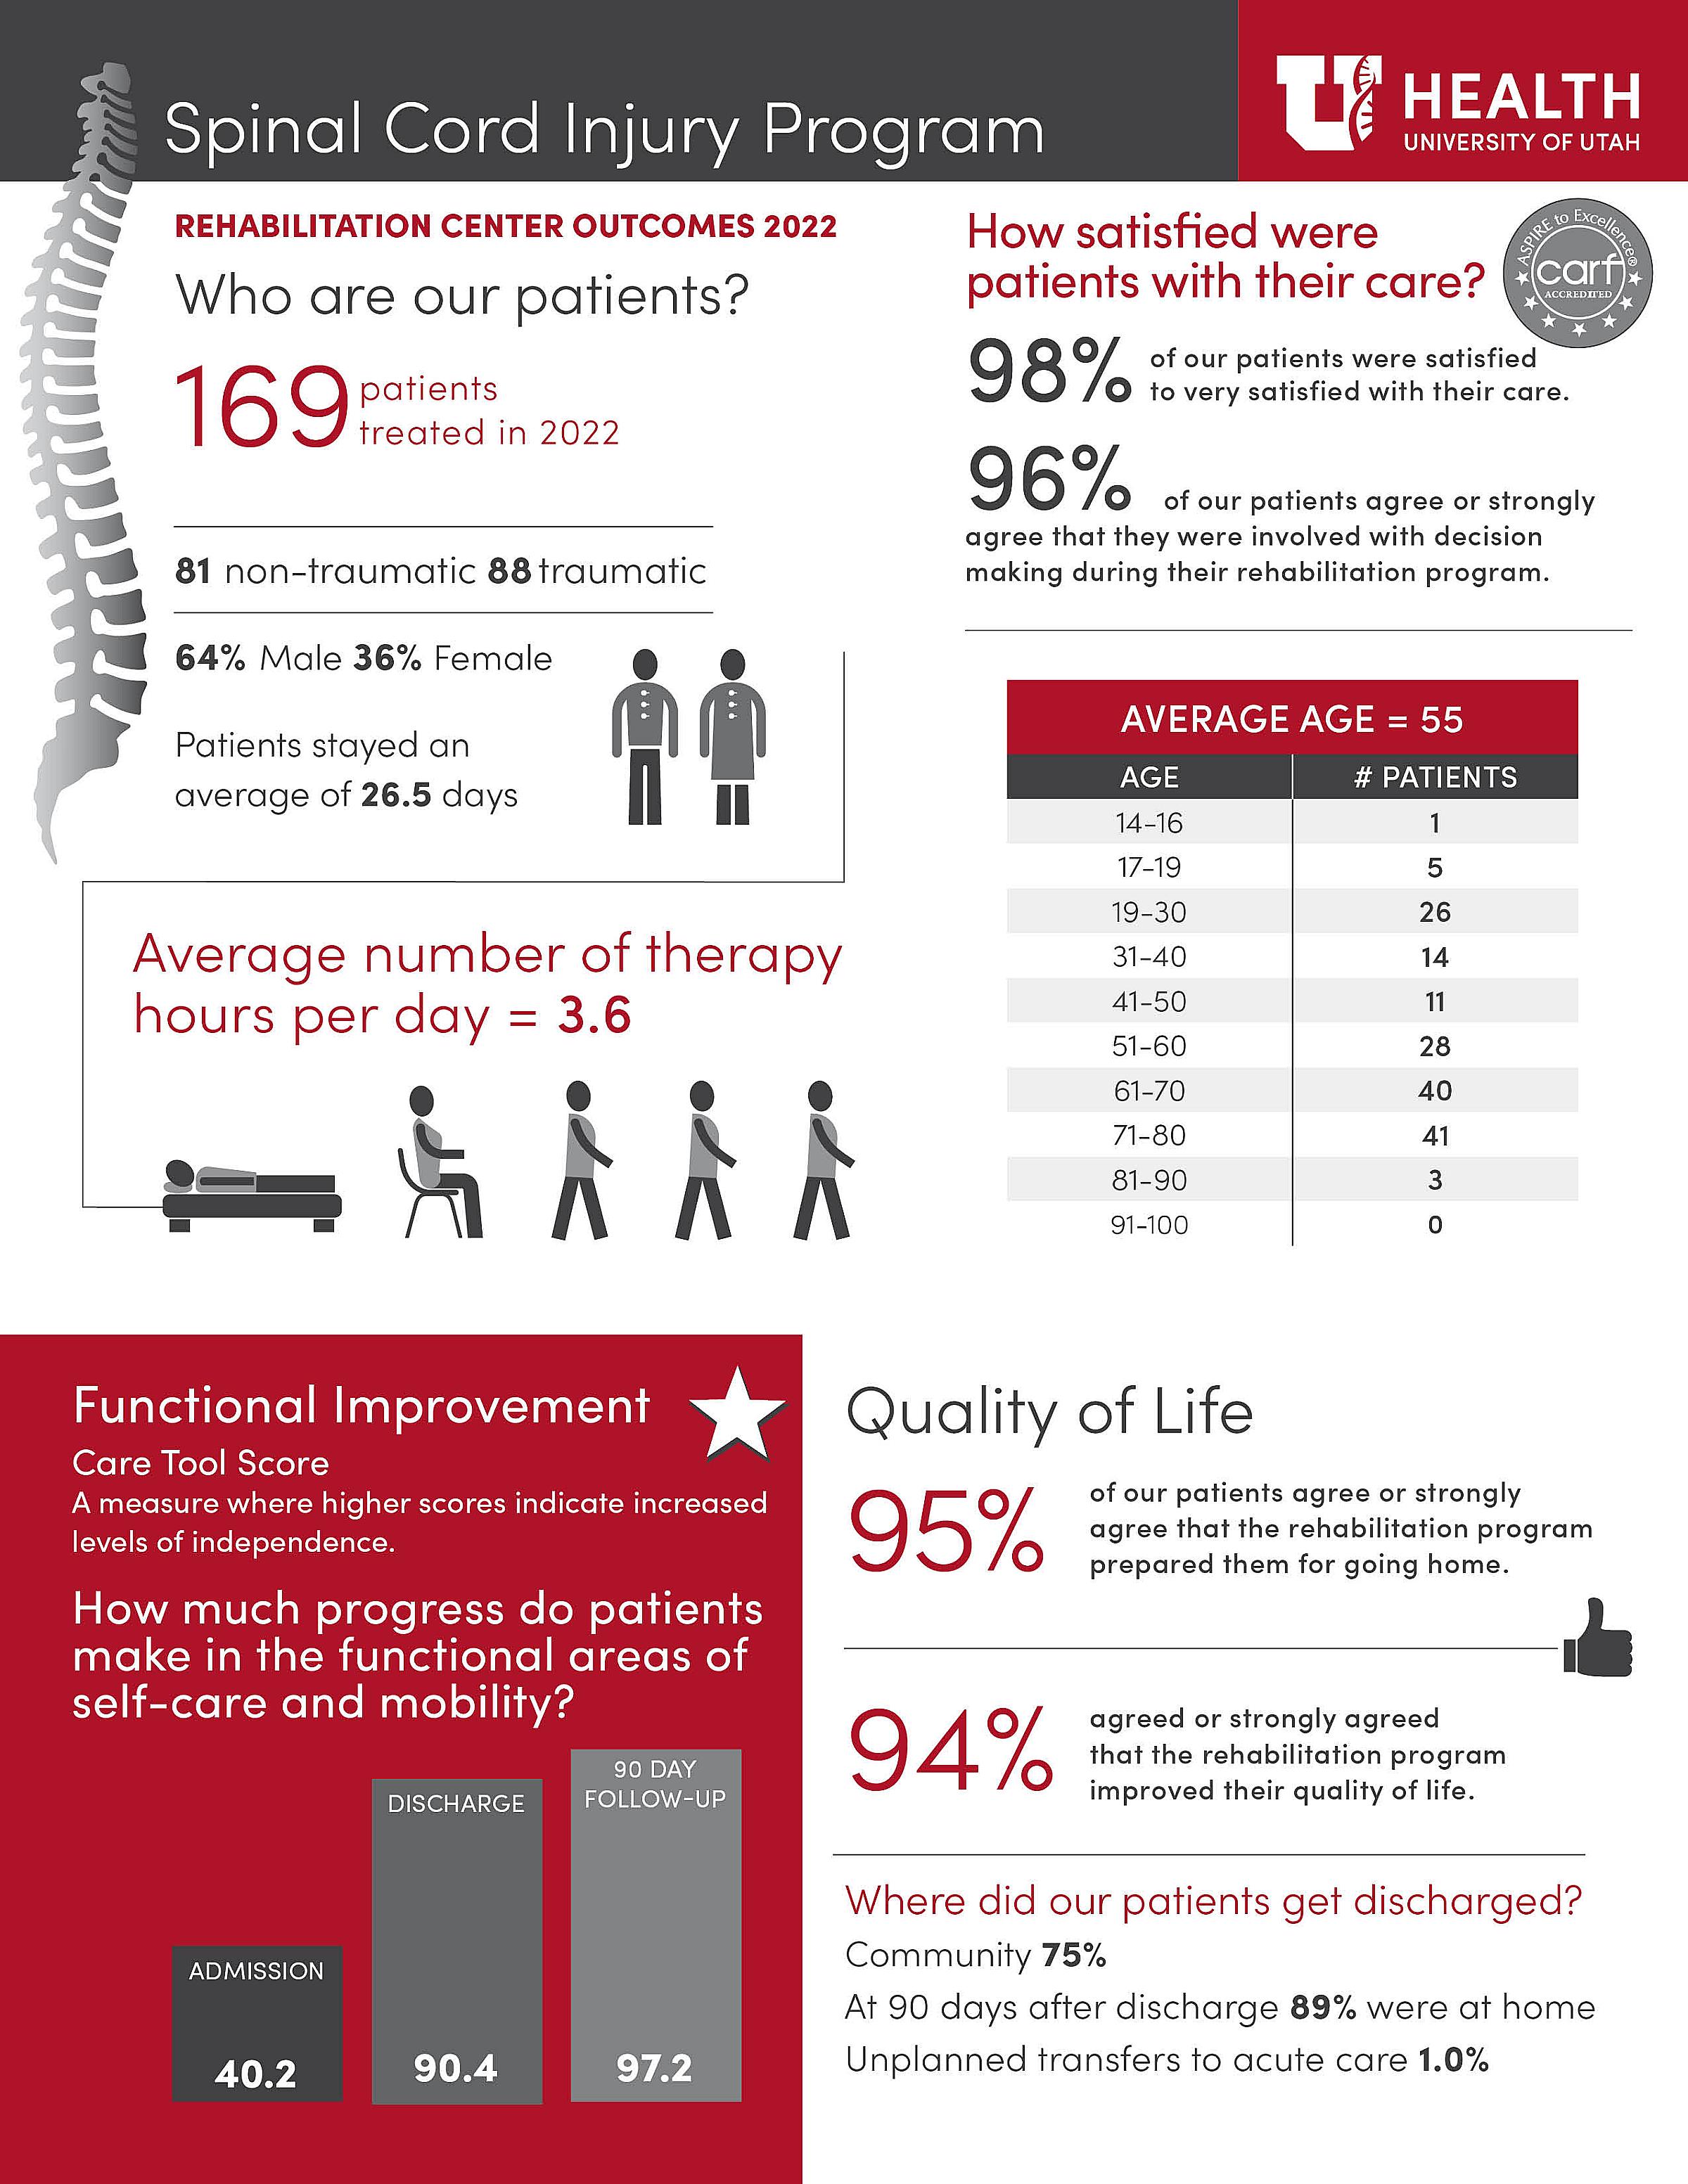 A data summary that shows the progress of patients who received spinal cord injury treatment at Craig H. Neilsen Rehabilitation Hospital in 2022.